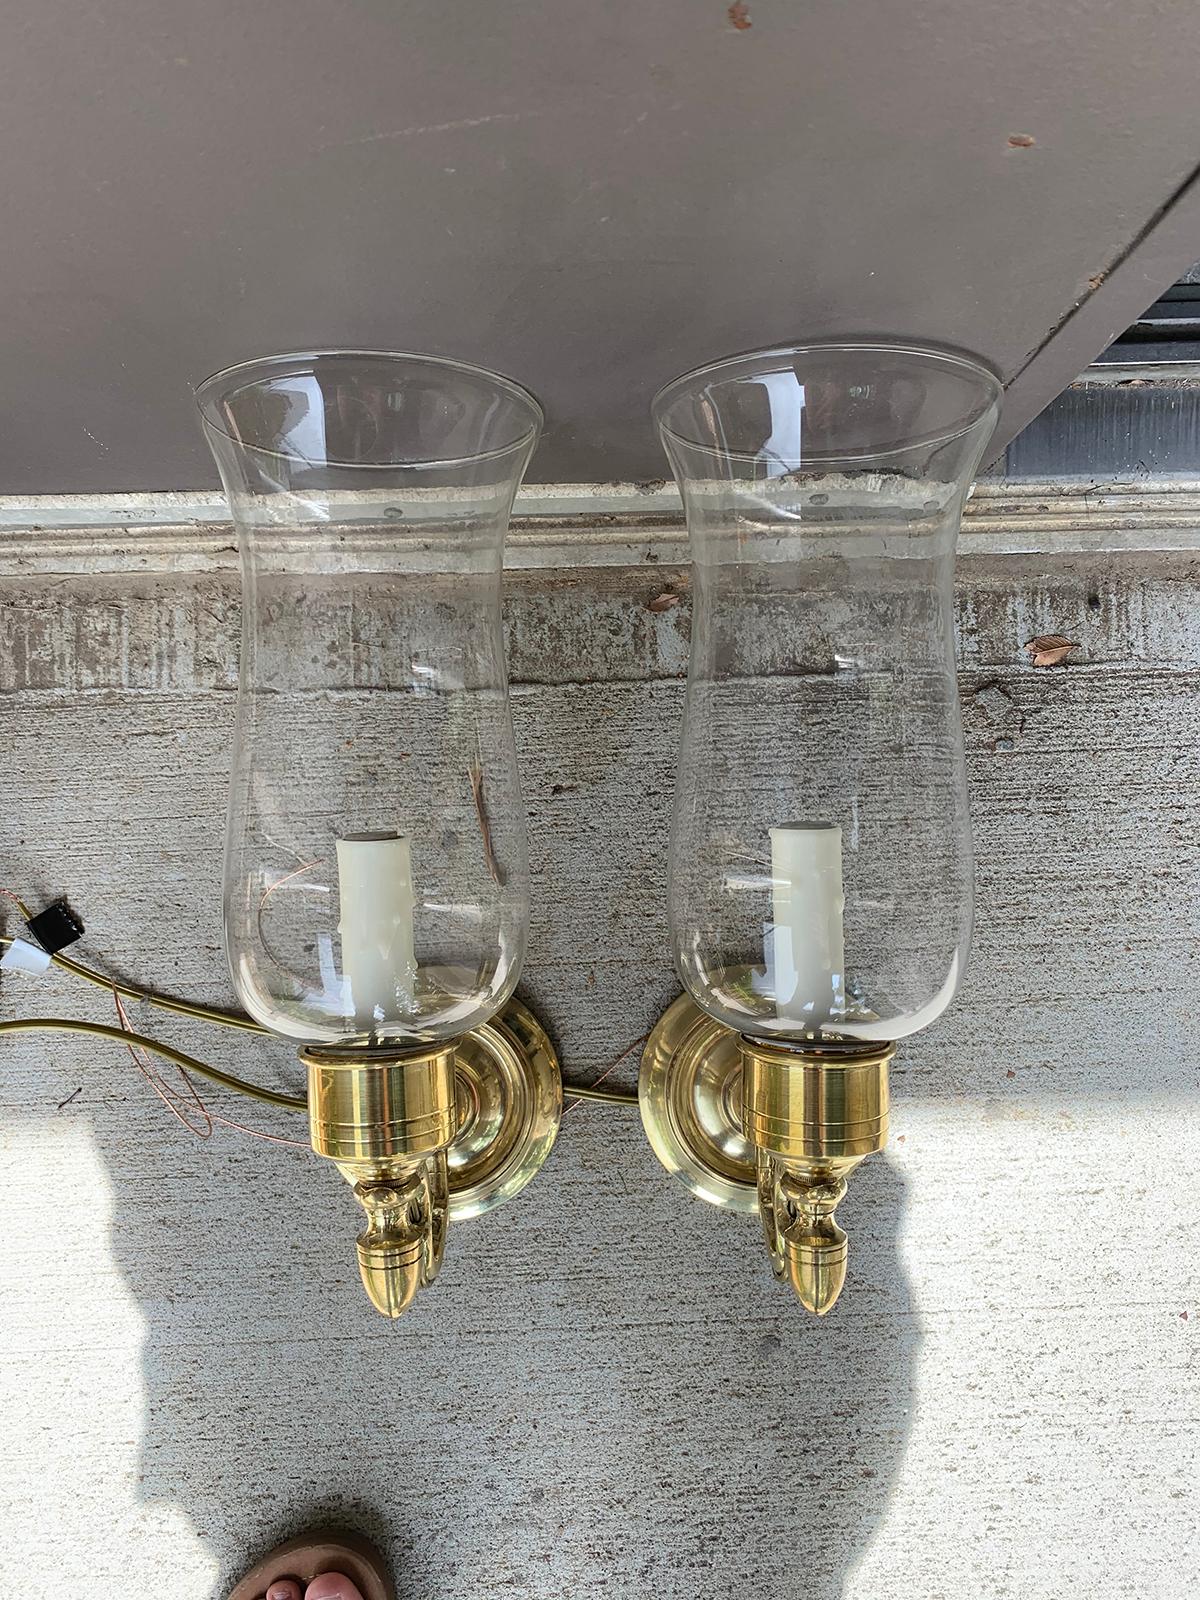 Pair of 20th century brass one-arm sconces with hurricanes
New wiring
Backplate measures 4.75